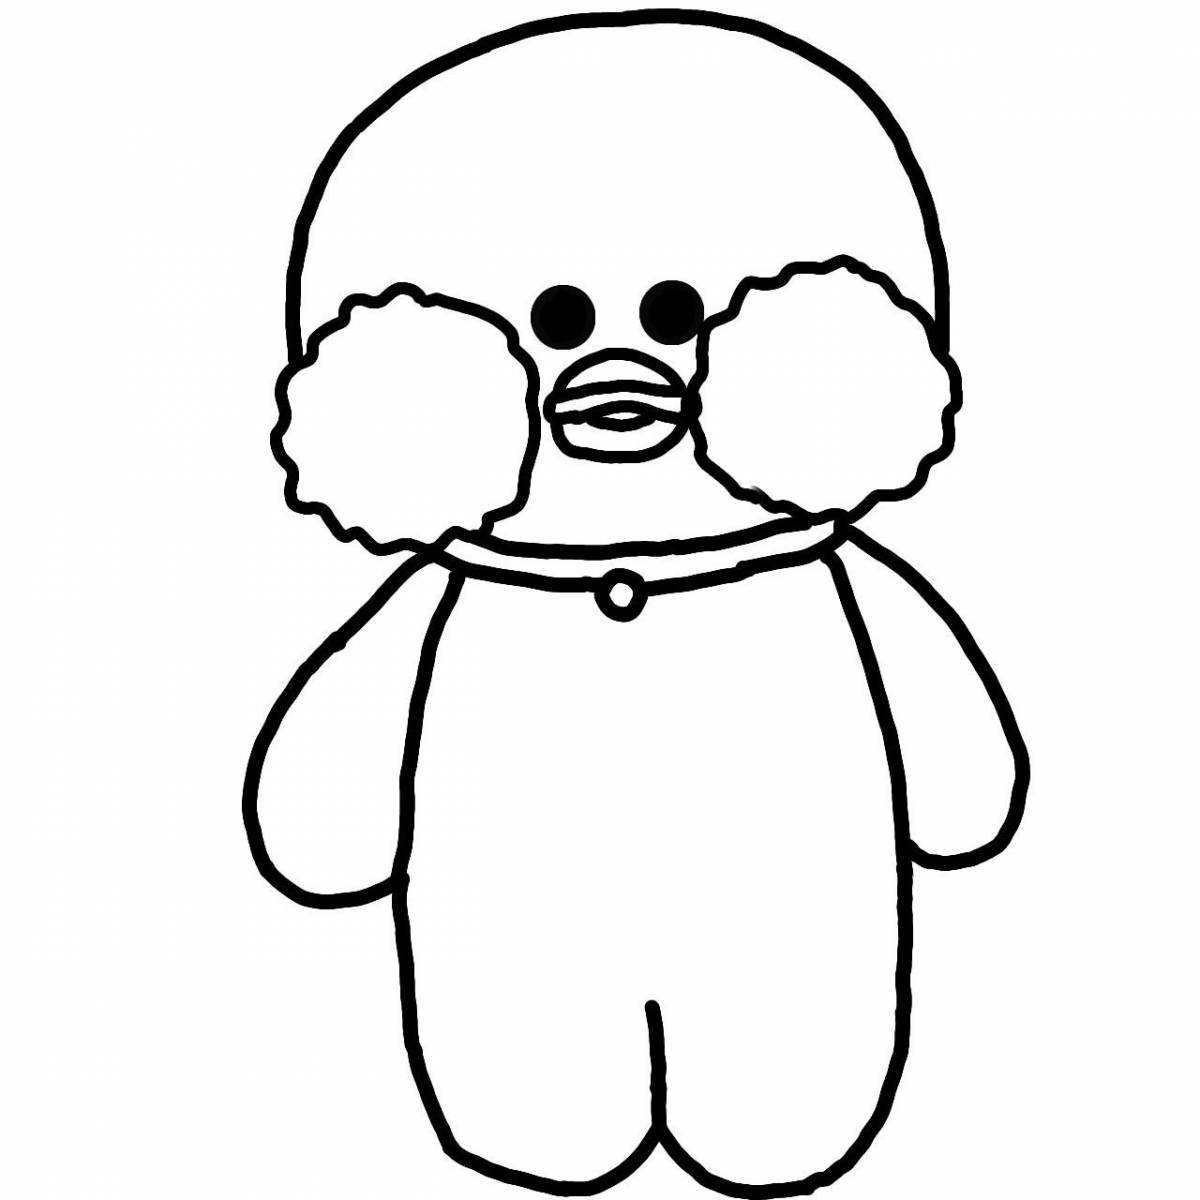 Colour funny duck lafanfan coloring book